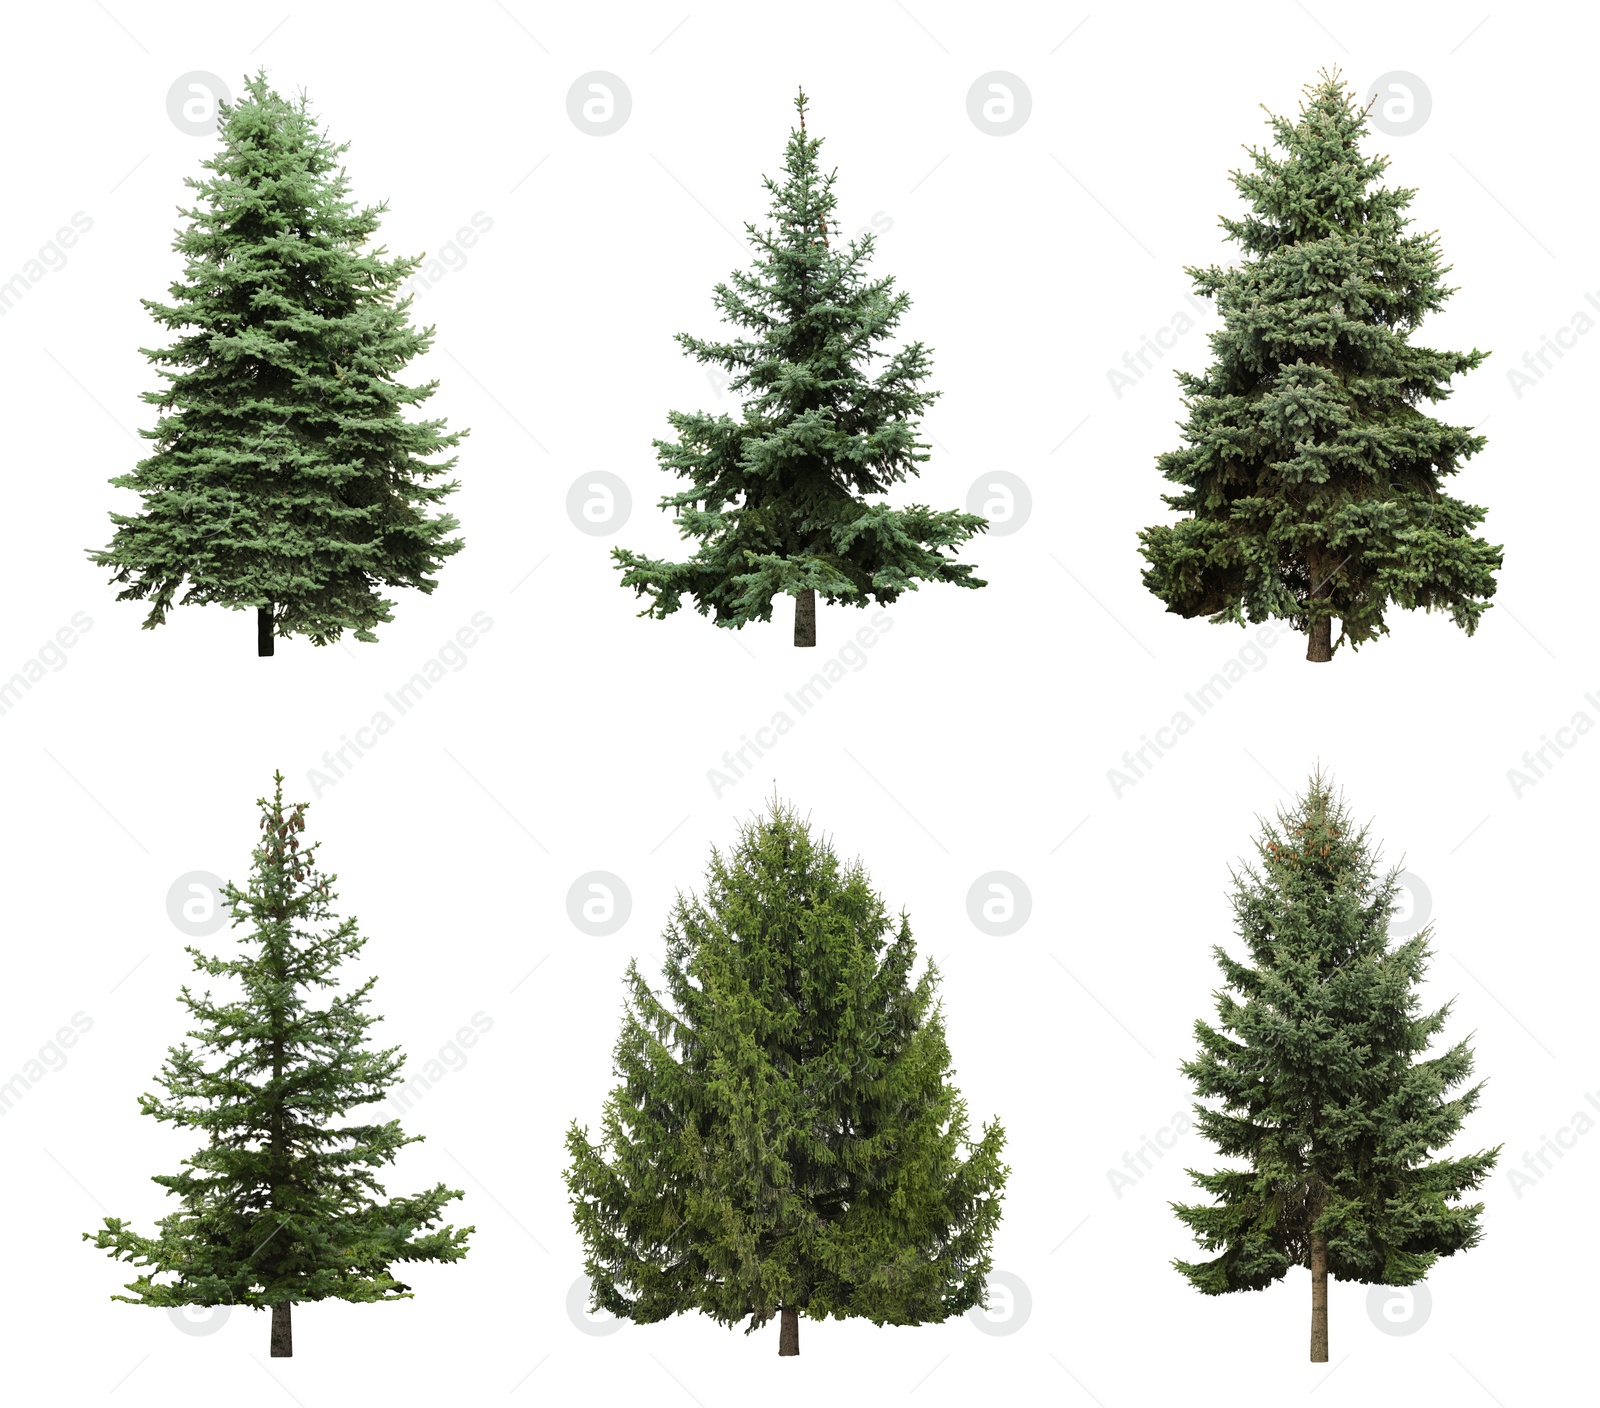 Image of Beautiful evergreen fir trees on white background, collage 